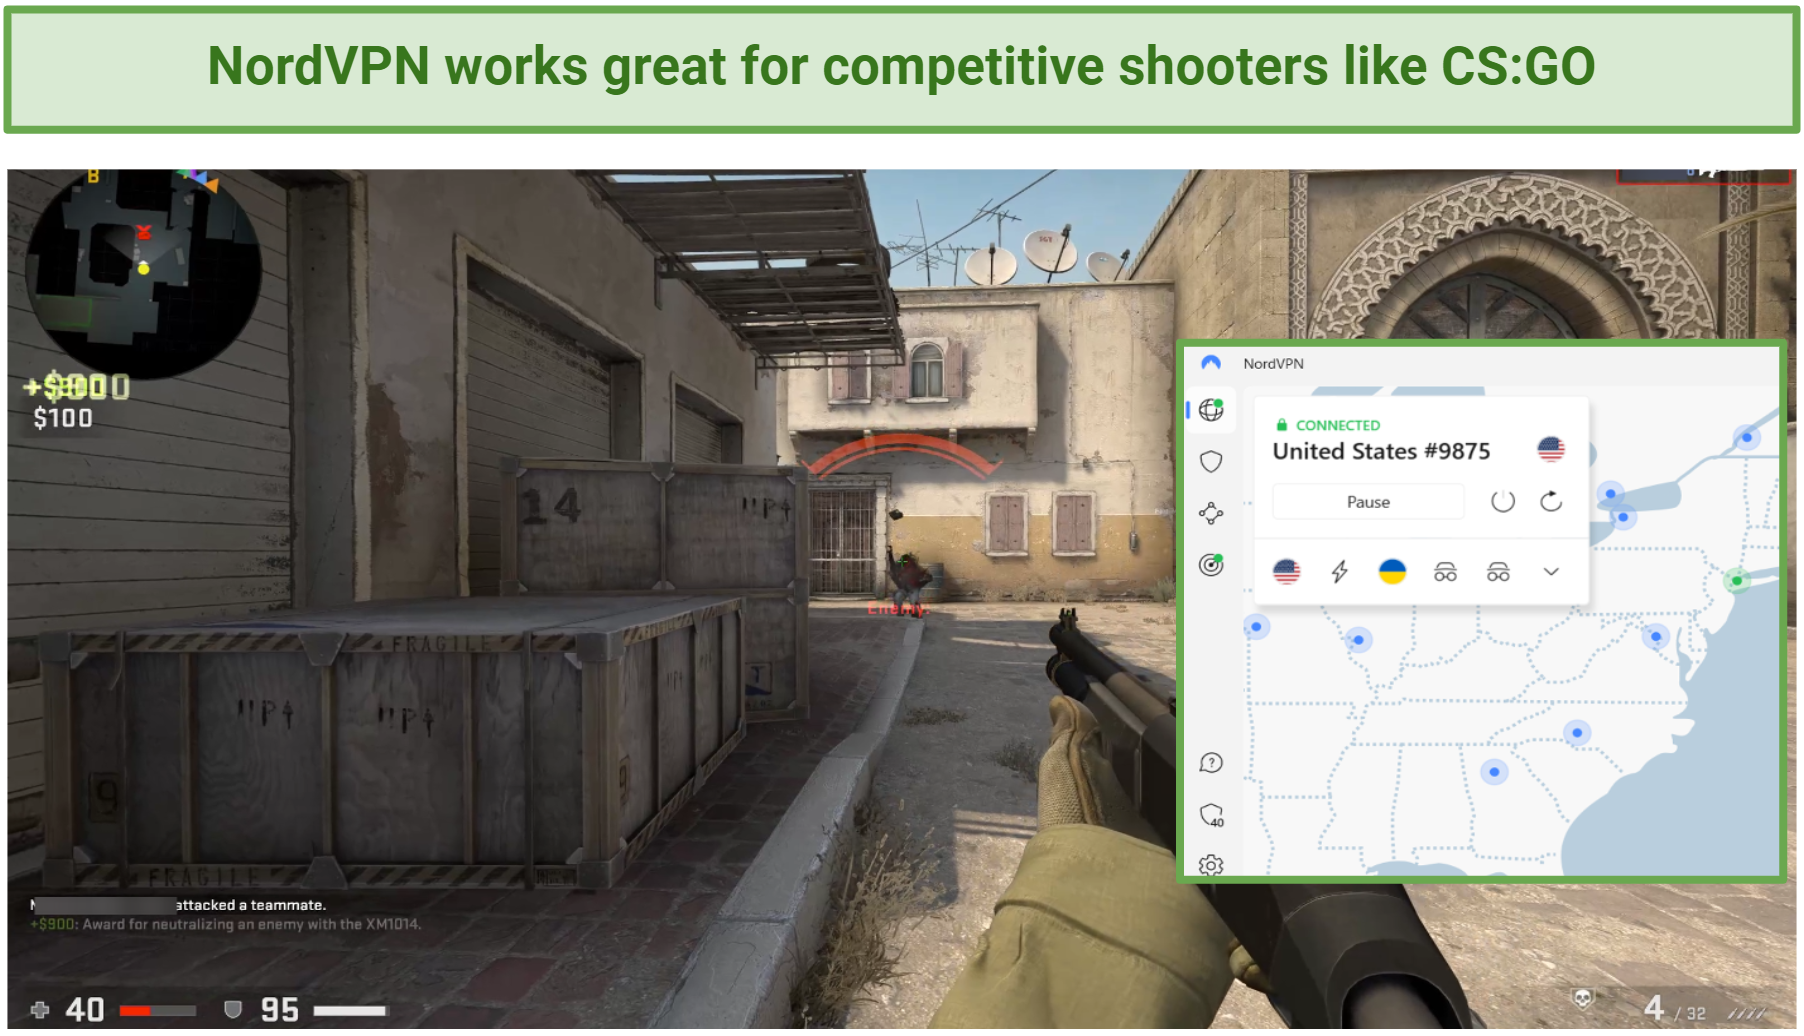 Screenshot of CS: GO match with NordVPN connected to the US server